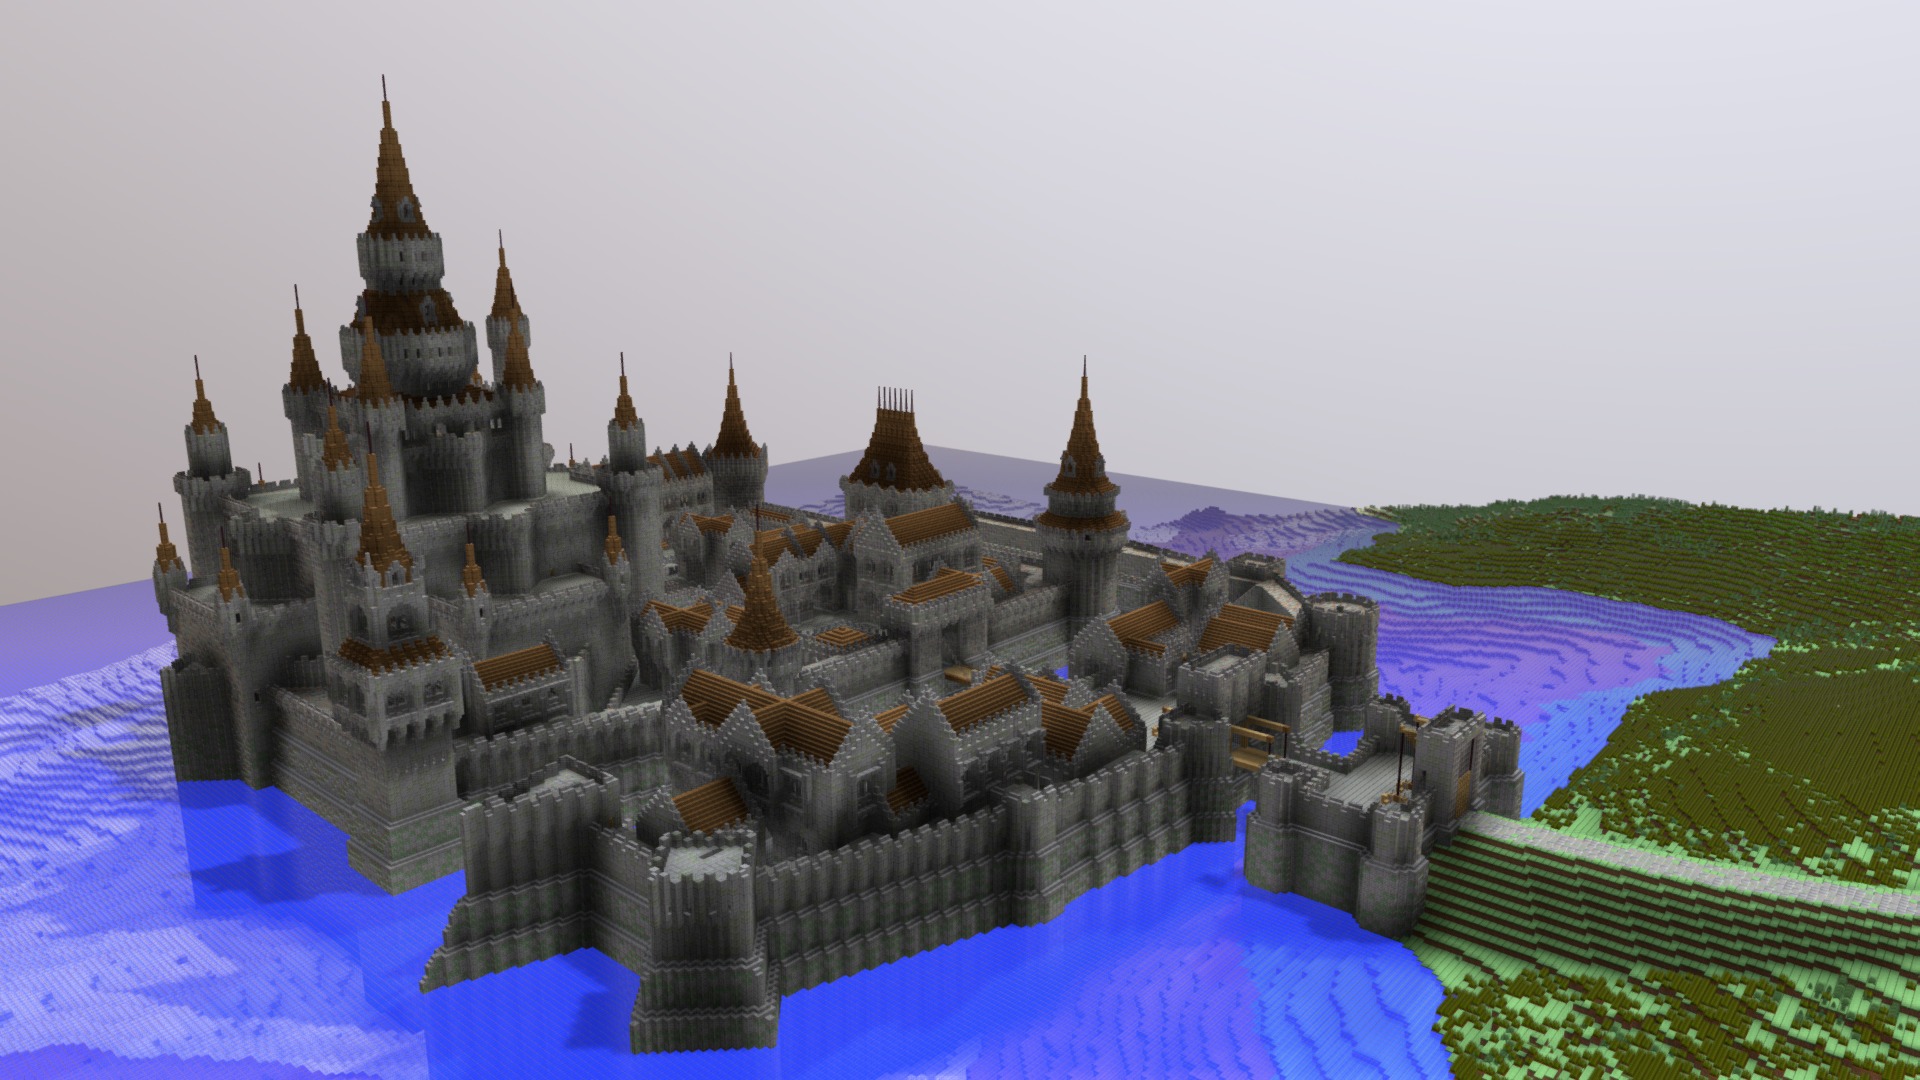 3D model Edenton - This is a 3D model of the Edenton. The 3D model is about a castle with many pointed rooftops.